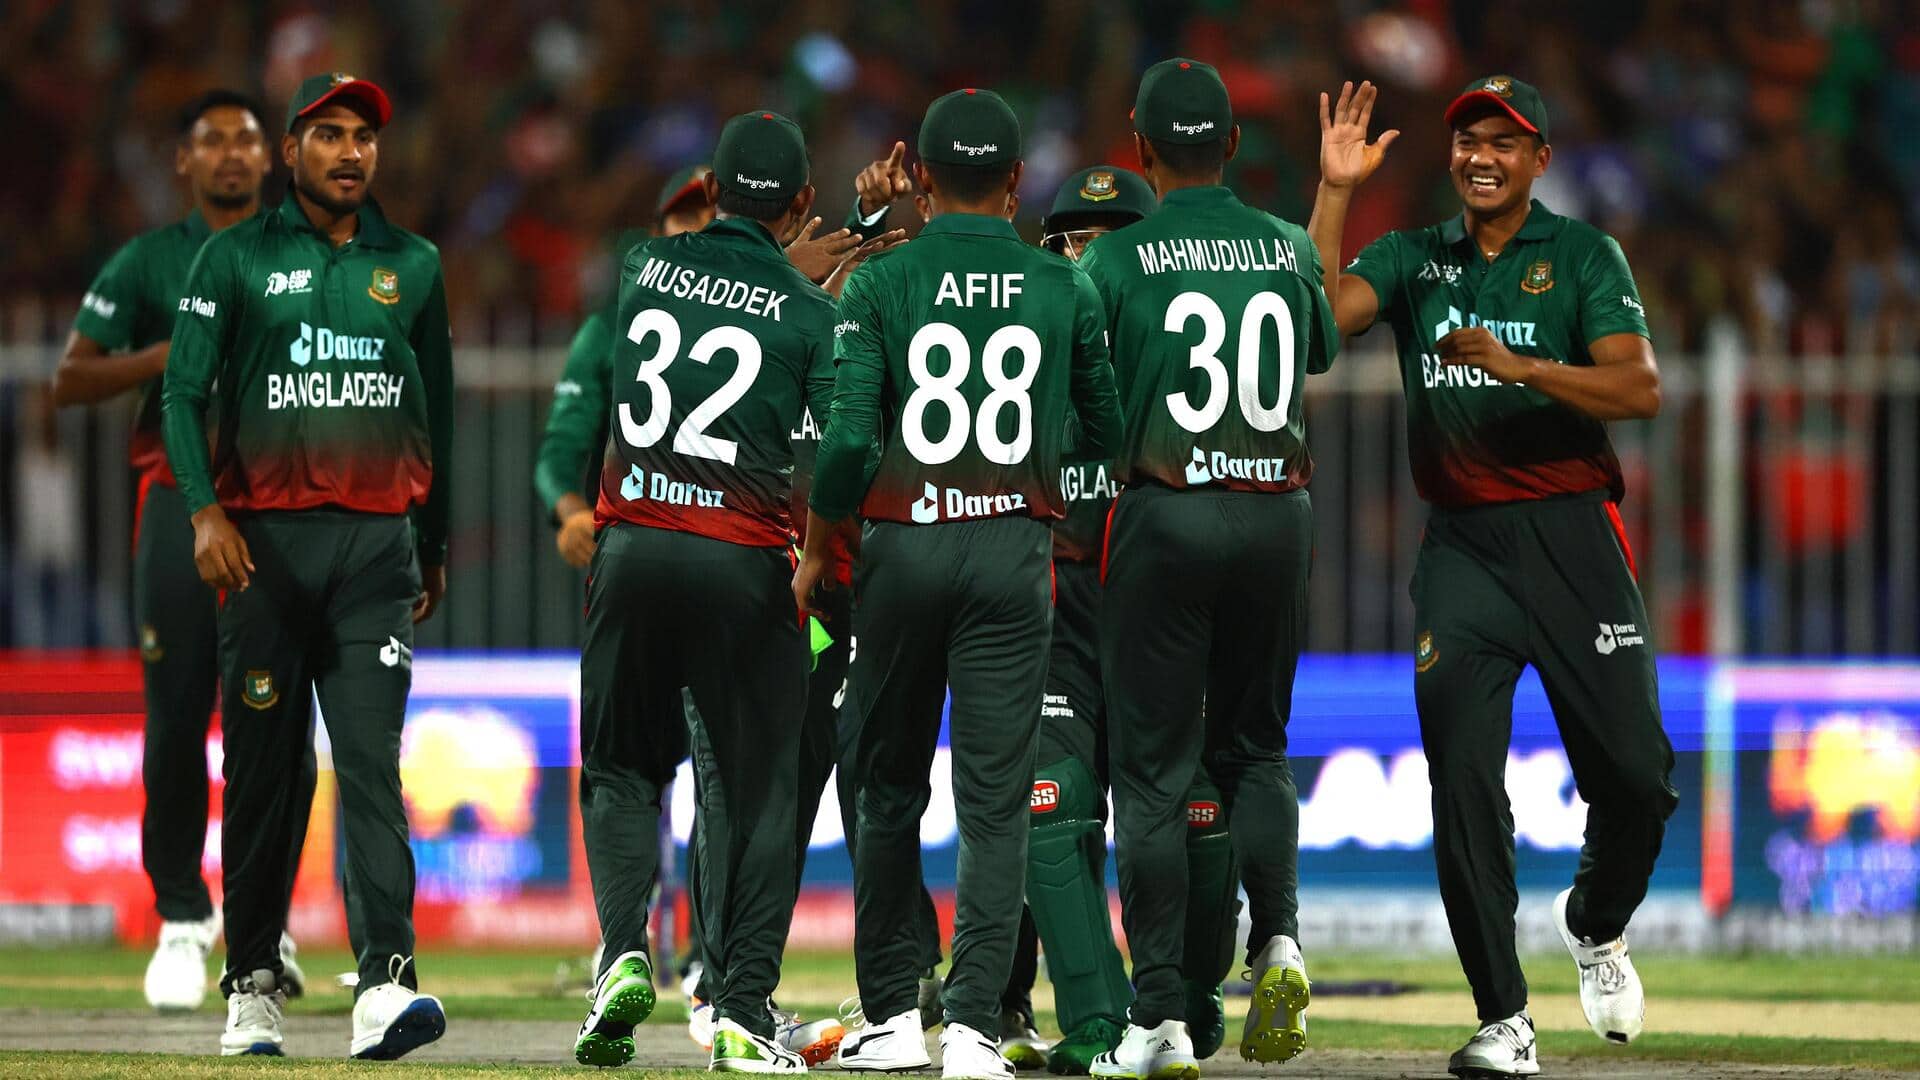 3rd T20I preview: Bangladesh, SL gear up for series decider